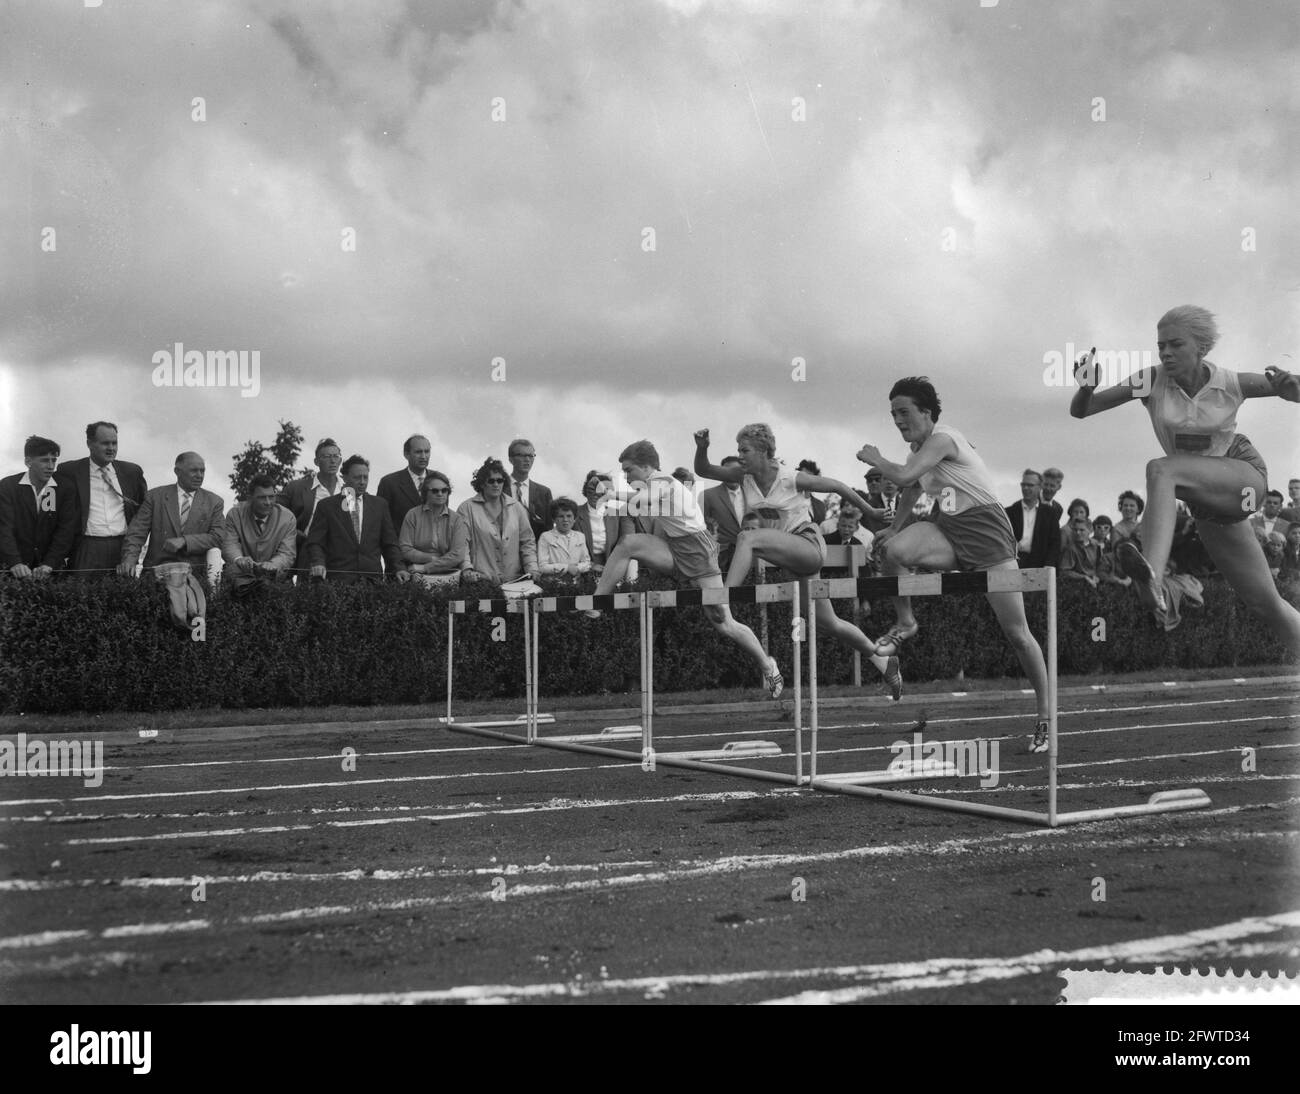 Women's athletics Netherlands v. Sweden in Vlaardingen, 80m hurdles from left to right Mutter(1), Cederstrom(2) and Van de Bosch (3), August 2, 1959, The Netherlands, 20th century press agency photo, news to remember, documentary, historic photography 1945-1990, visual stories, human history of the Twentieth Century, capturing moments in time Stock Photo